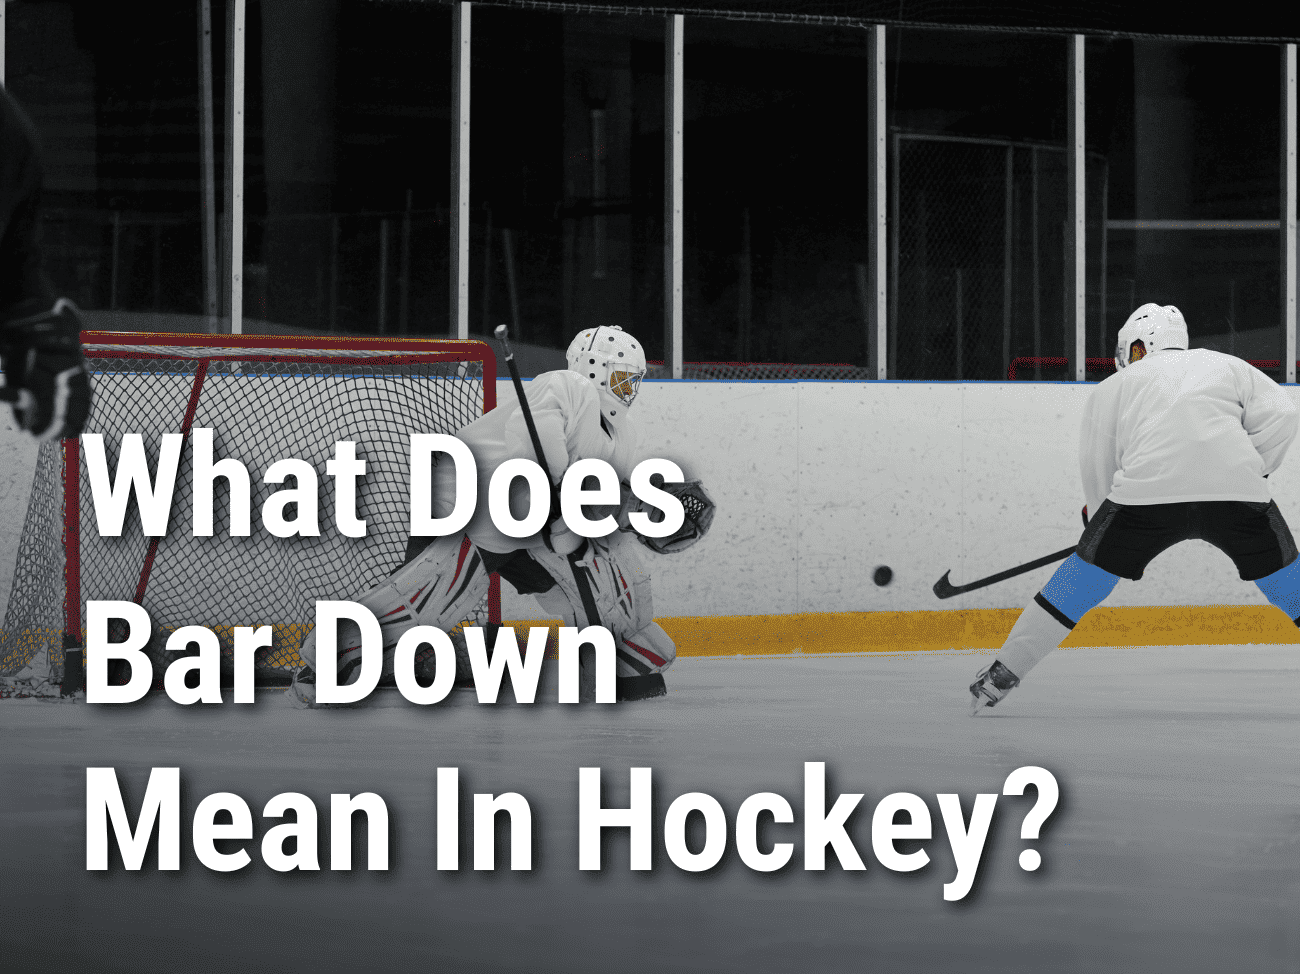 What Does Bar Down Mean In Hockey?